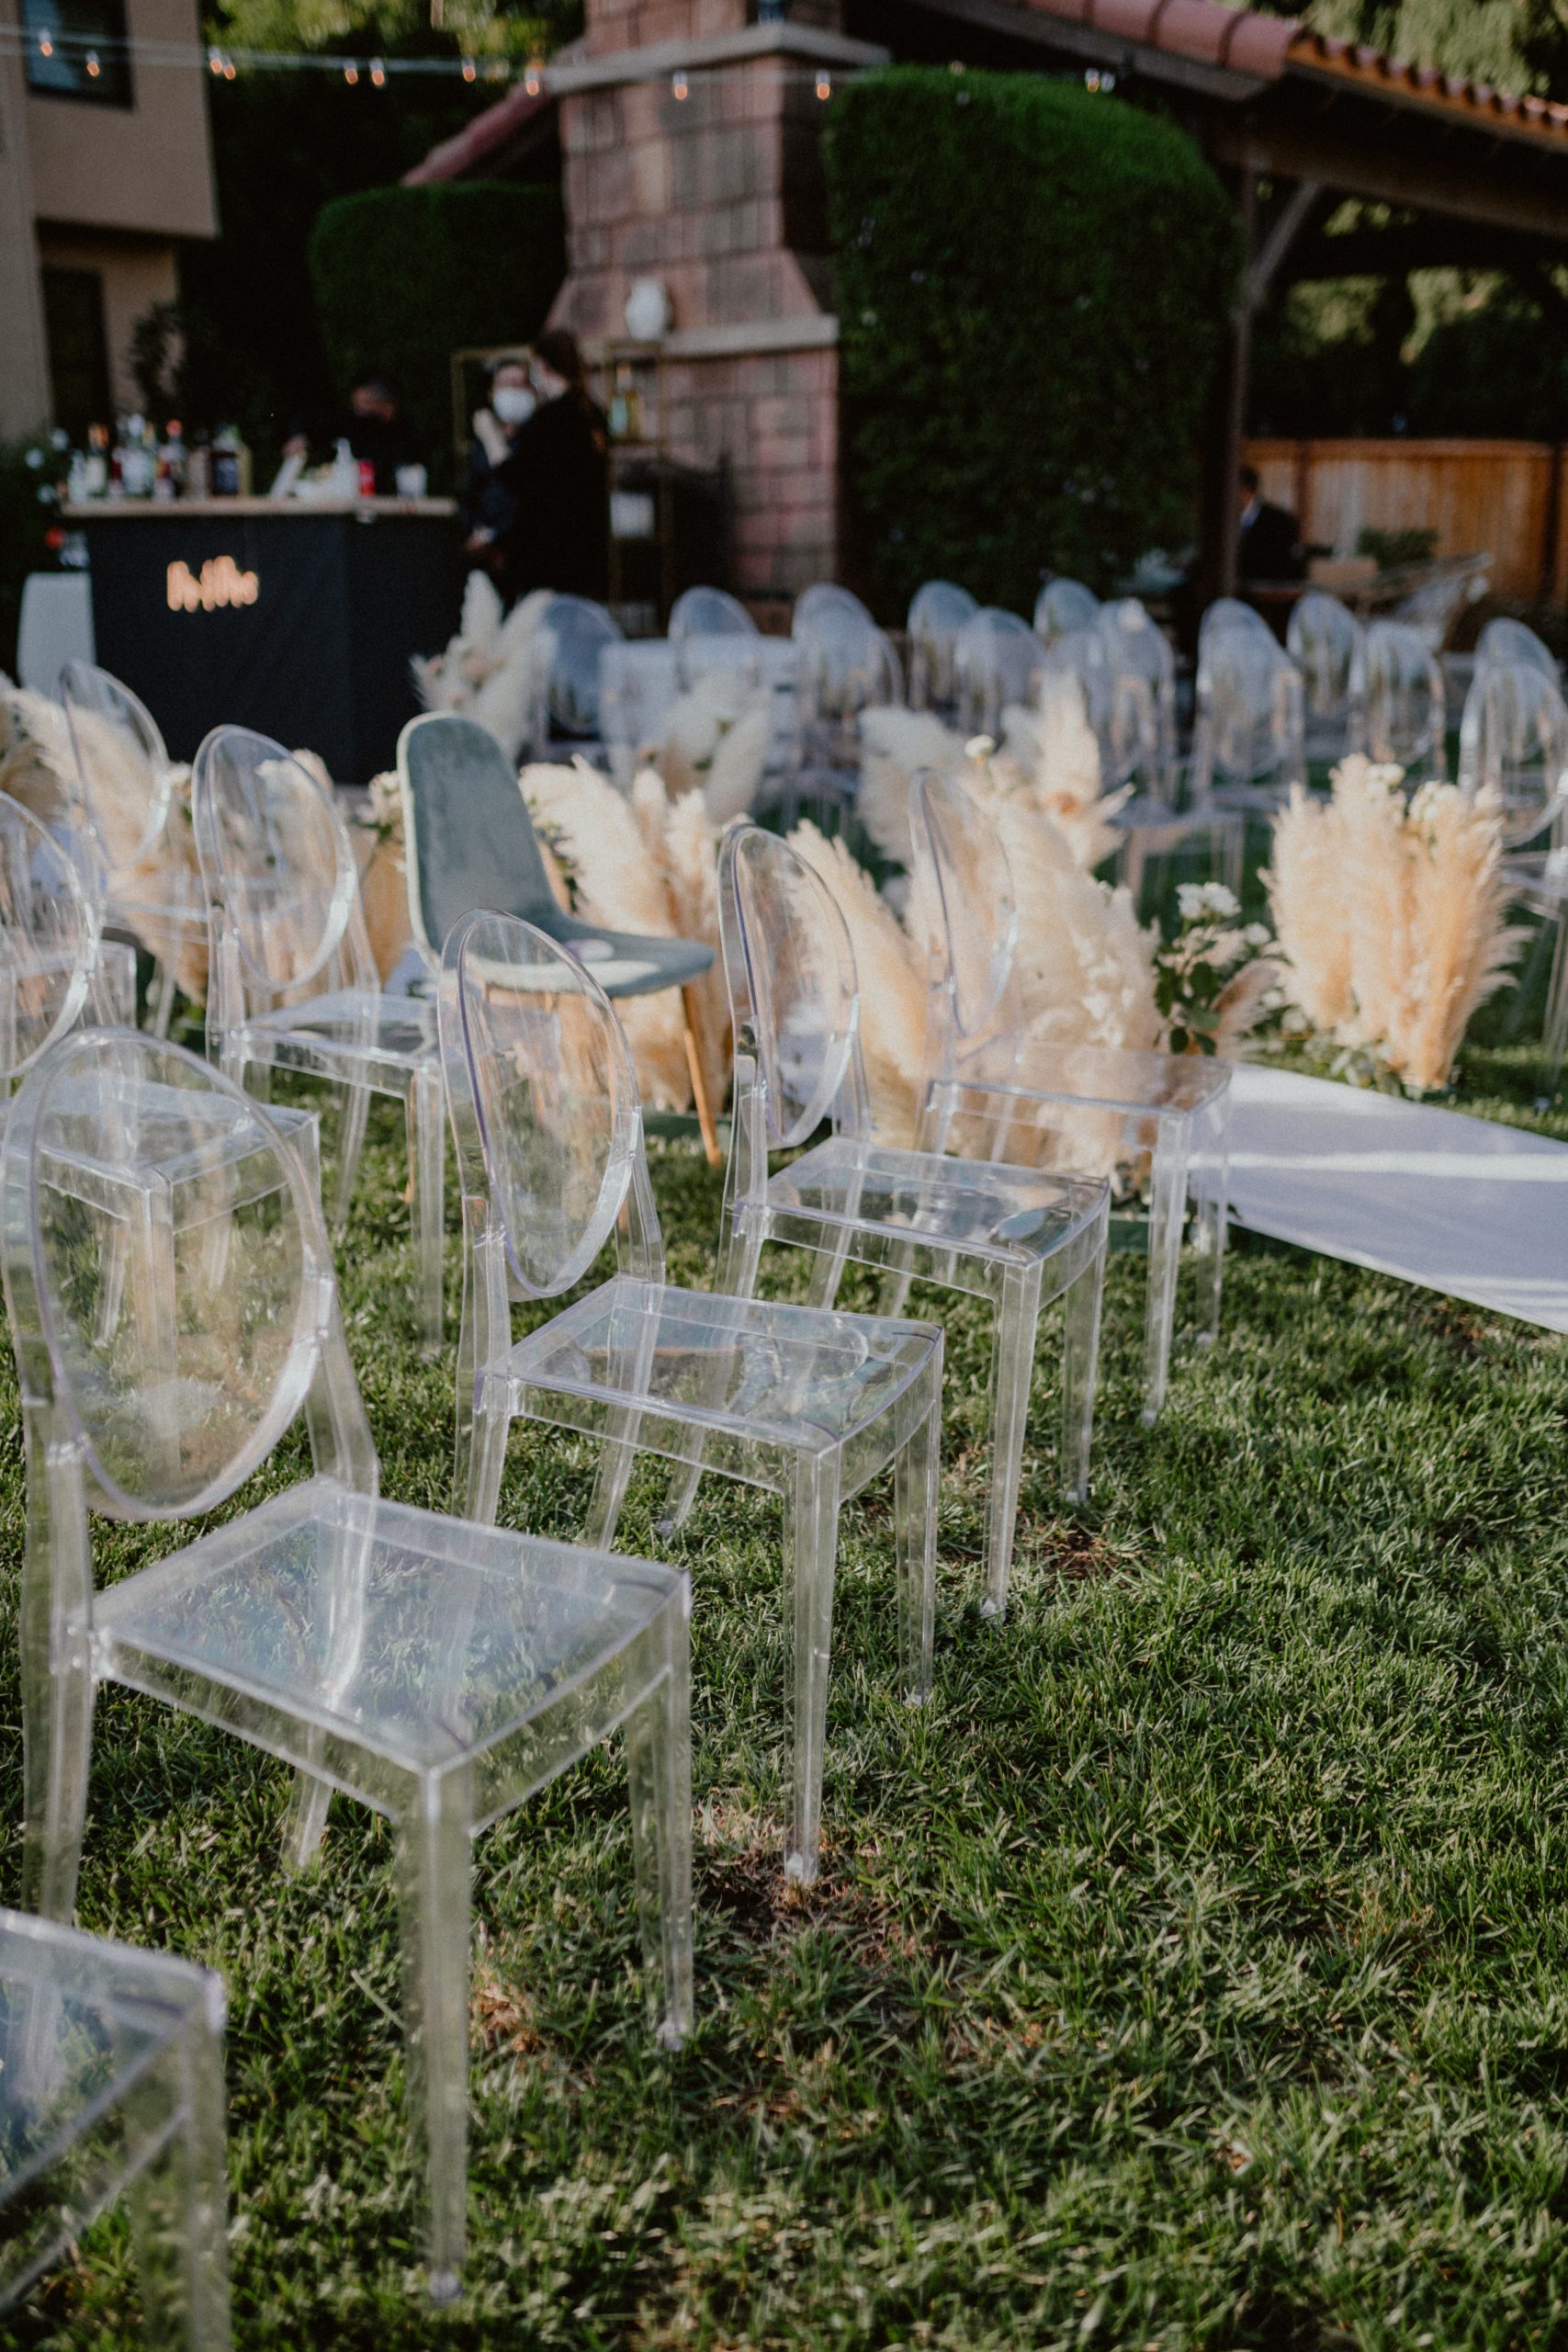 Pre-wedding ceremony set up with Pampas Grass and translucent chairs for wedding guests and a bar | San Diego Wedding Photographer, San Diego California Elopement Photographer, Destination Wedding Photographer, Destination Elopement Photographer, Newlywed moments ideas, Newlywed Photography inspiration, California Elopement ideas, San Diego Wedding Inspiration, Romantic Boho Wedding Ideas, Romantic Elopement Inspiration, Bohemian Wedding Ideas | chelseaabril.com